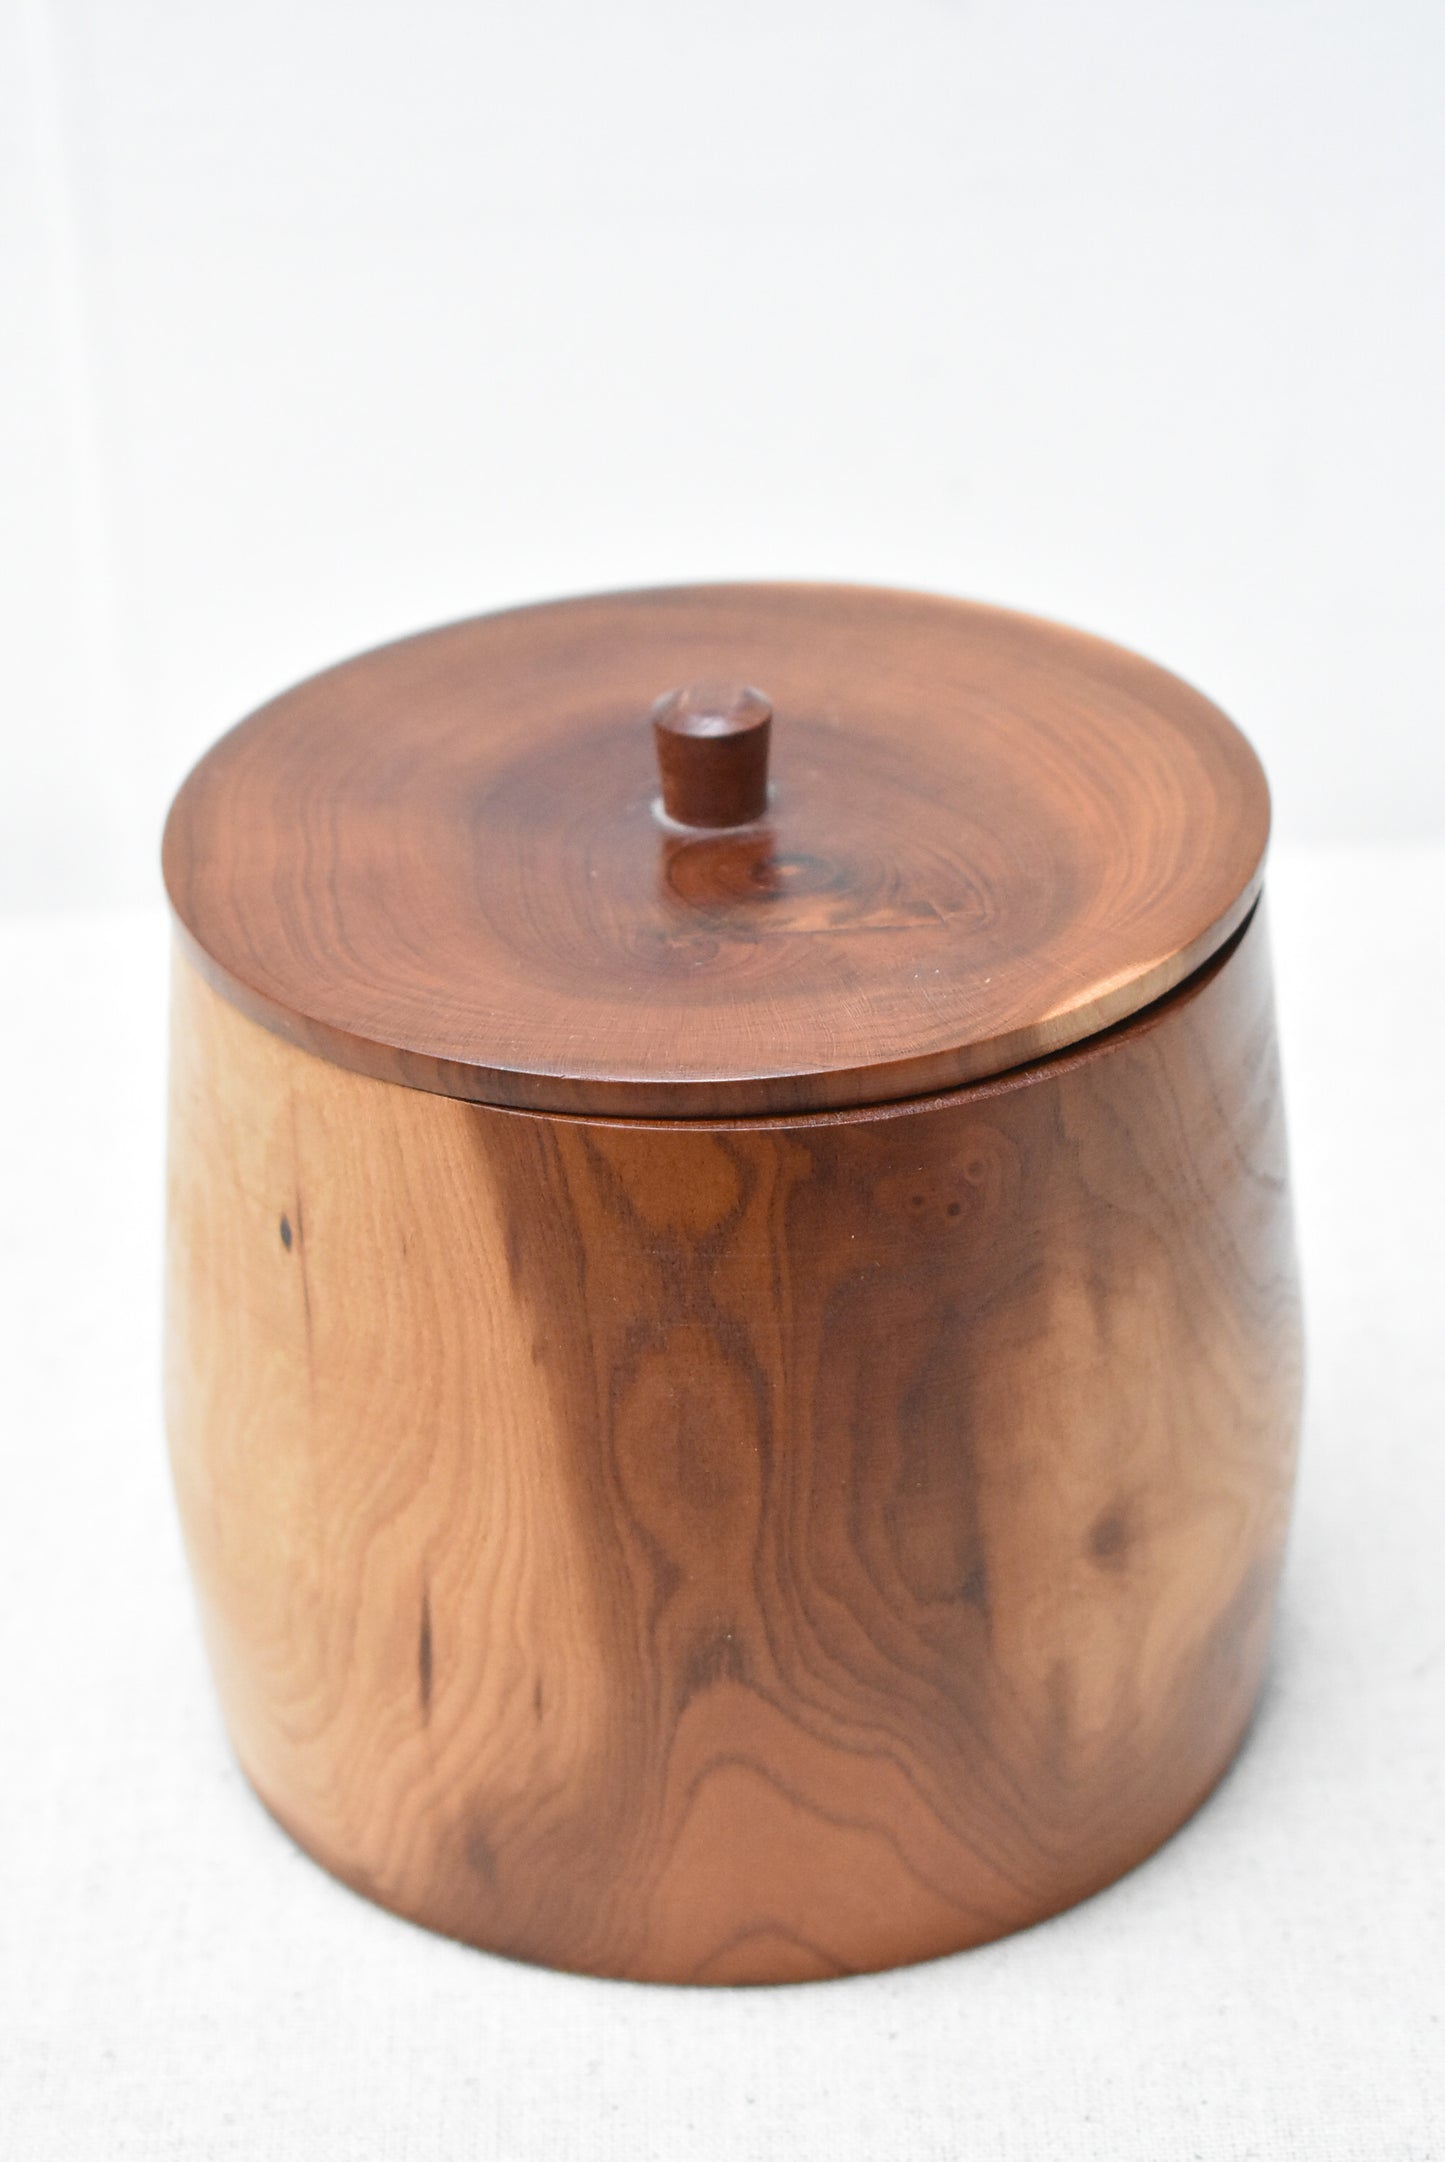 Turned wood container with lid